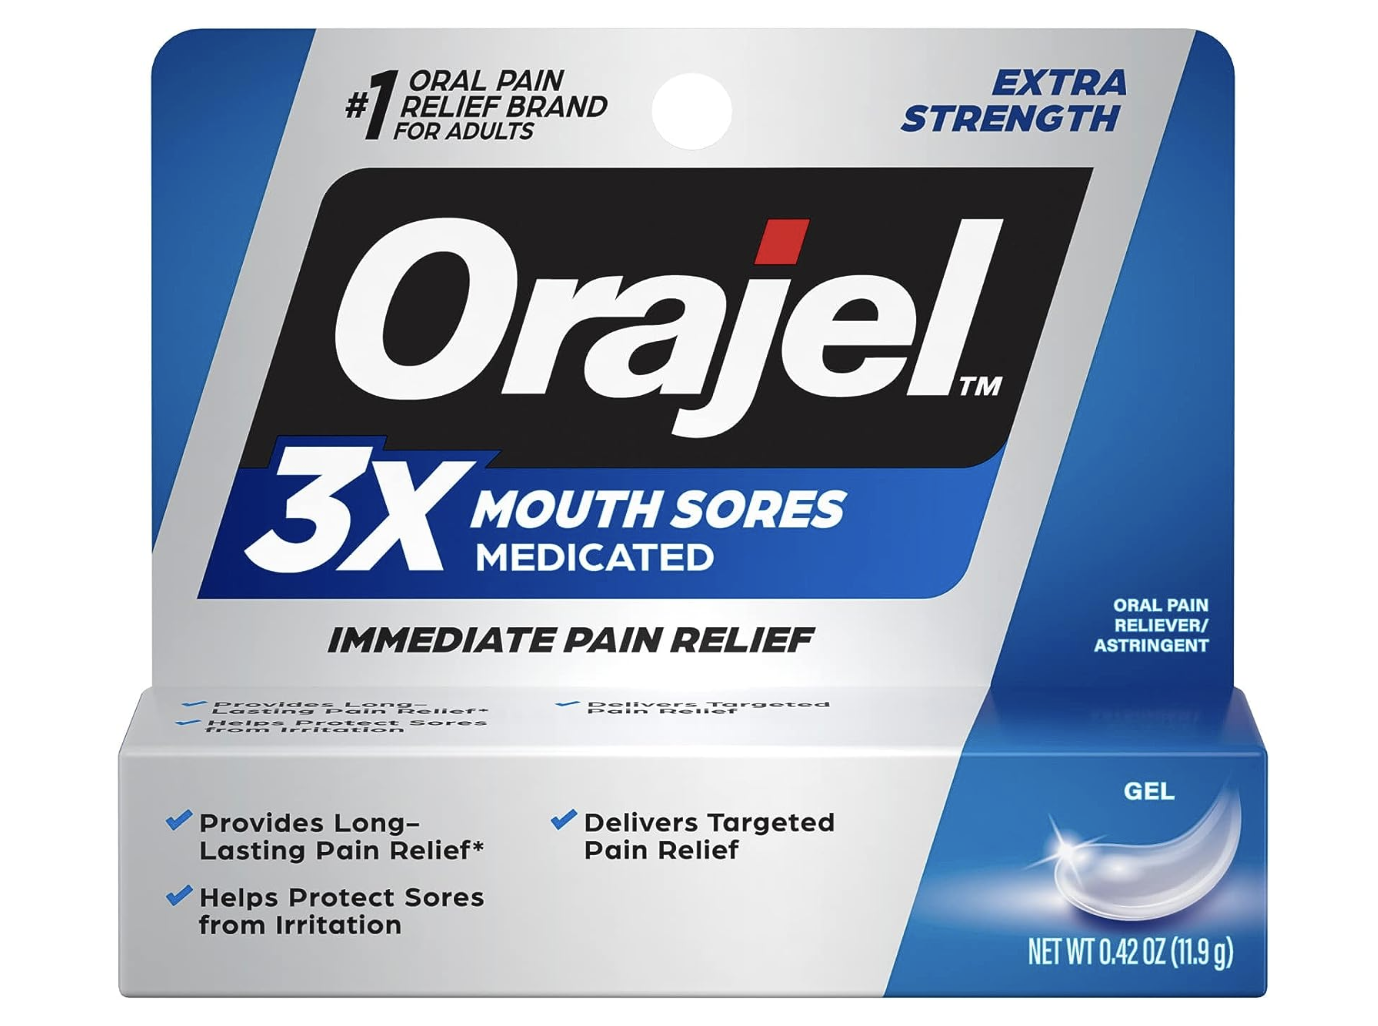 Orajel 3X for Mouth Sores, for menopause mouth symptoms